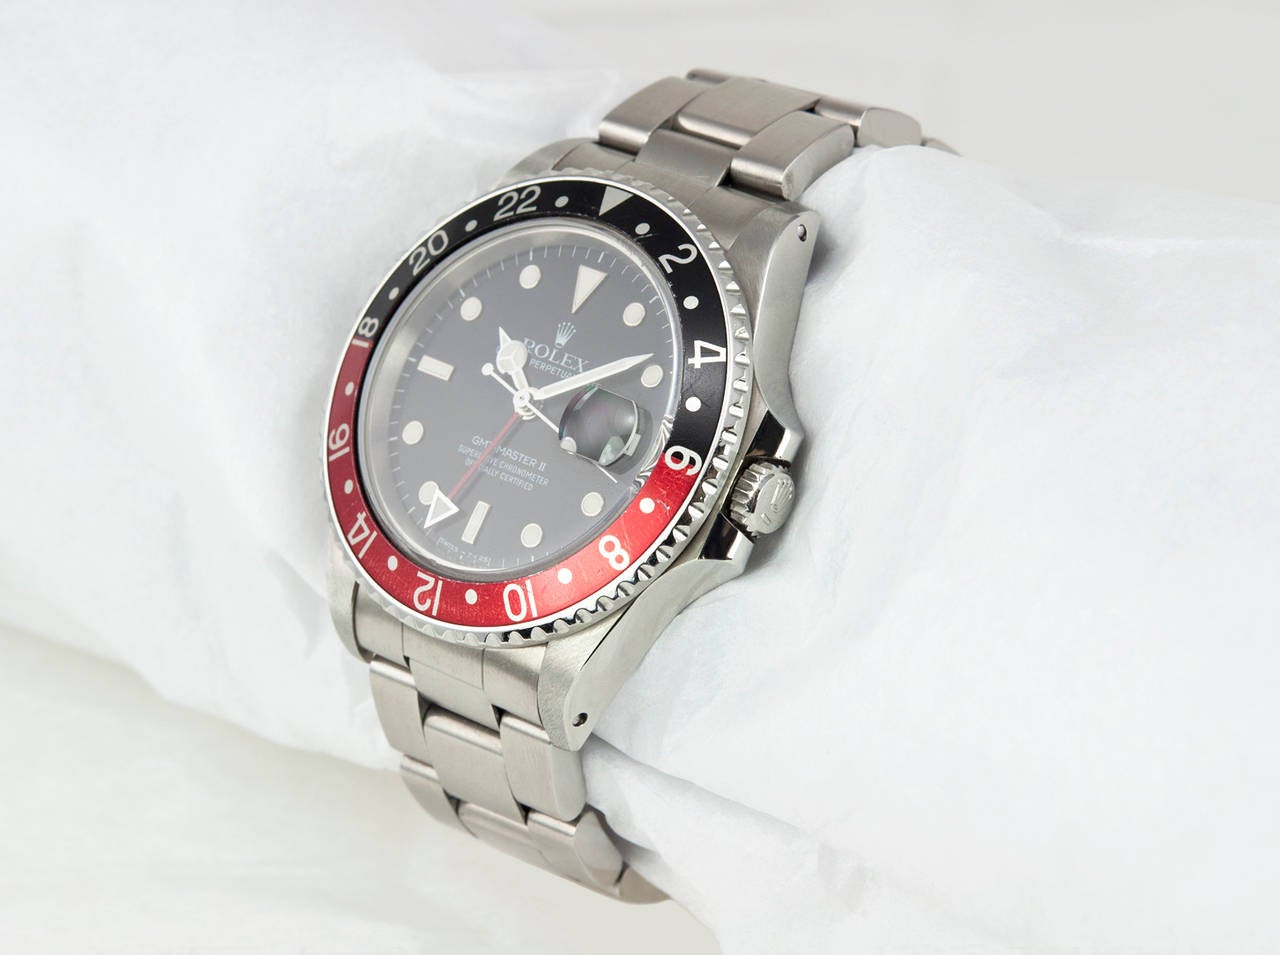 Rolex stainless steel GMT-Master II wristwatch, Ref. 16760, circa 1984. This watch features an automatic movement, quickset date, scratch-resistant sapphire crystal, screw-down crown, stainless steel bi-directional black and red rotating bezel, and